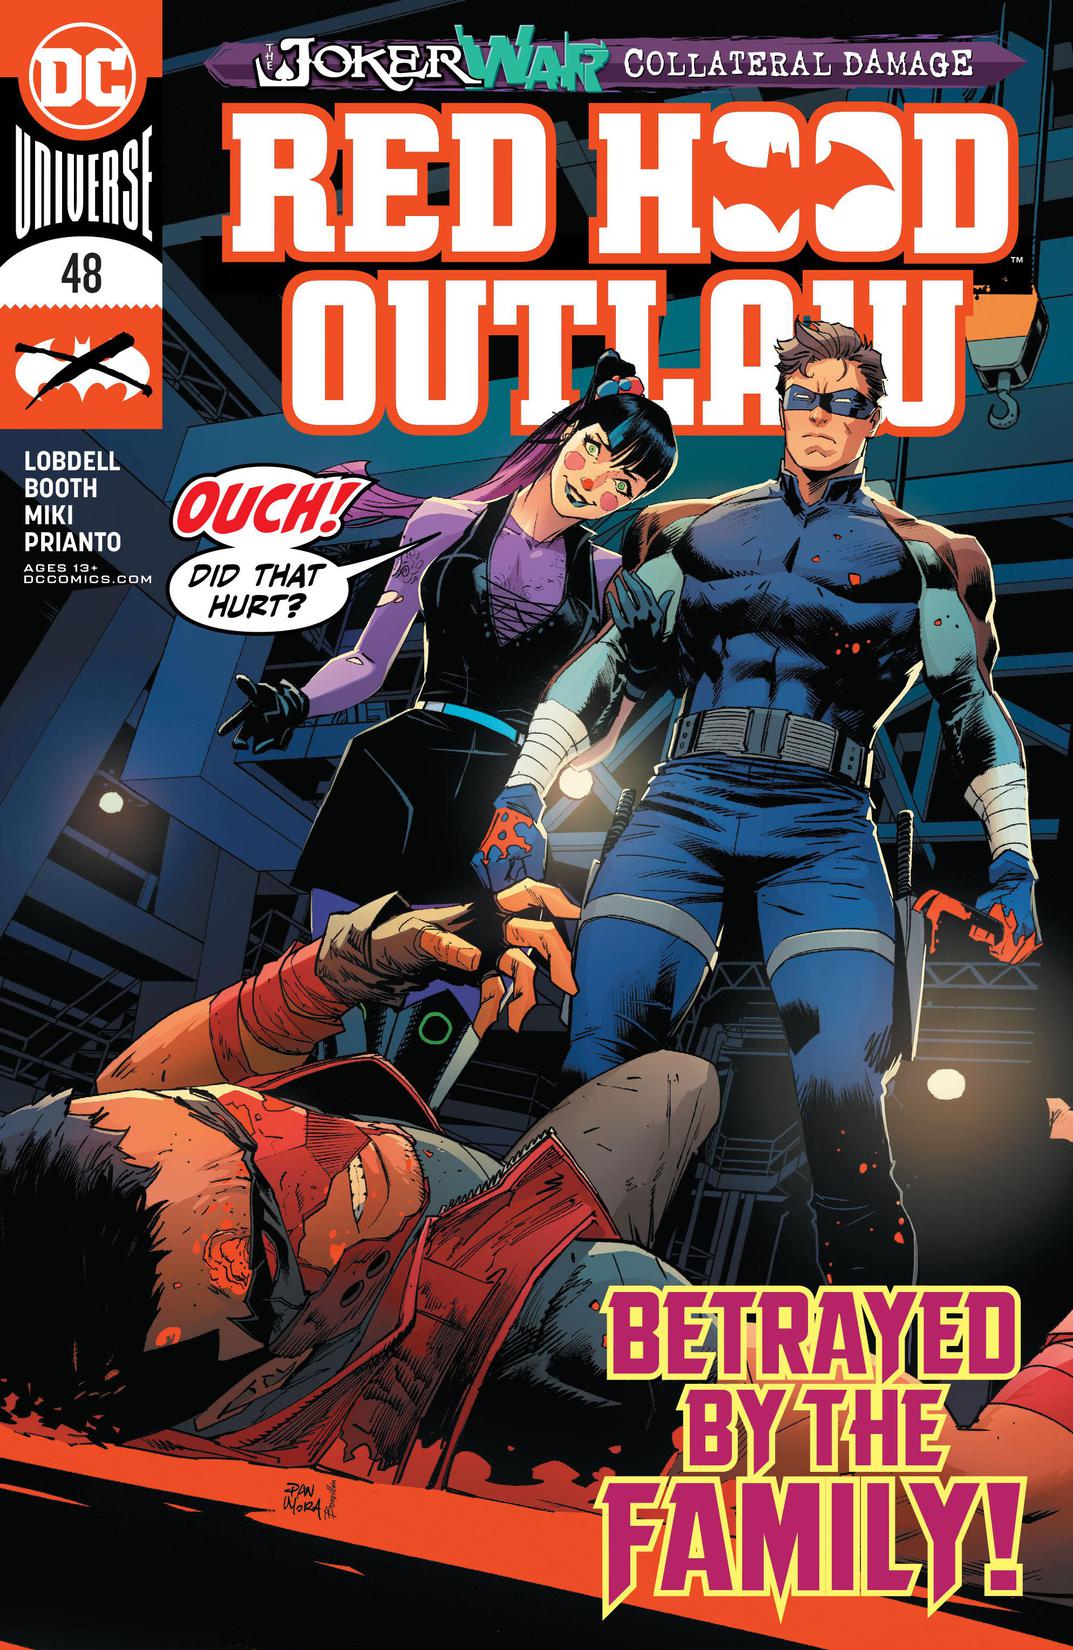 Red Hood: Outlaw (2016-) #48 preview images